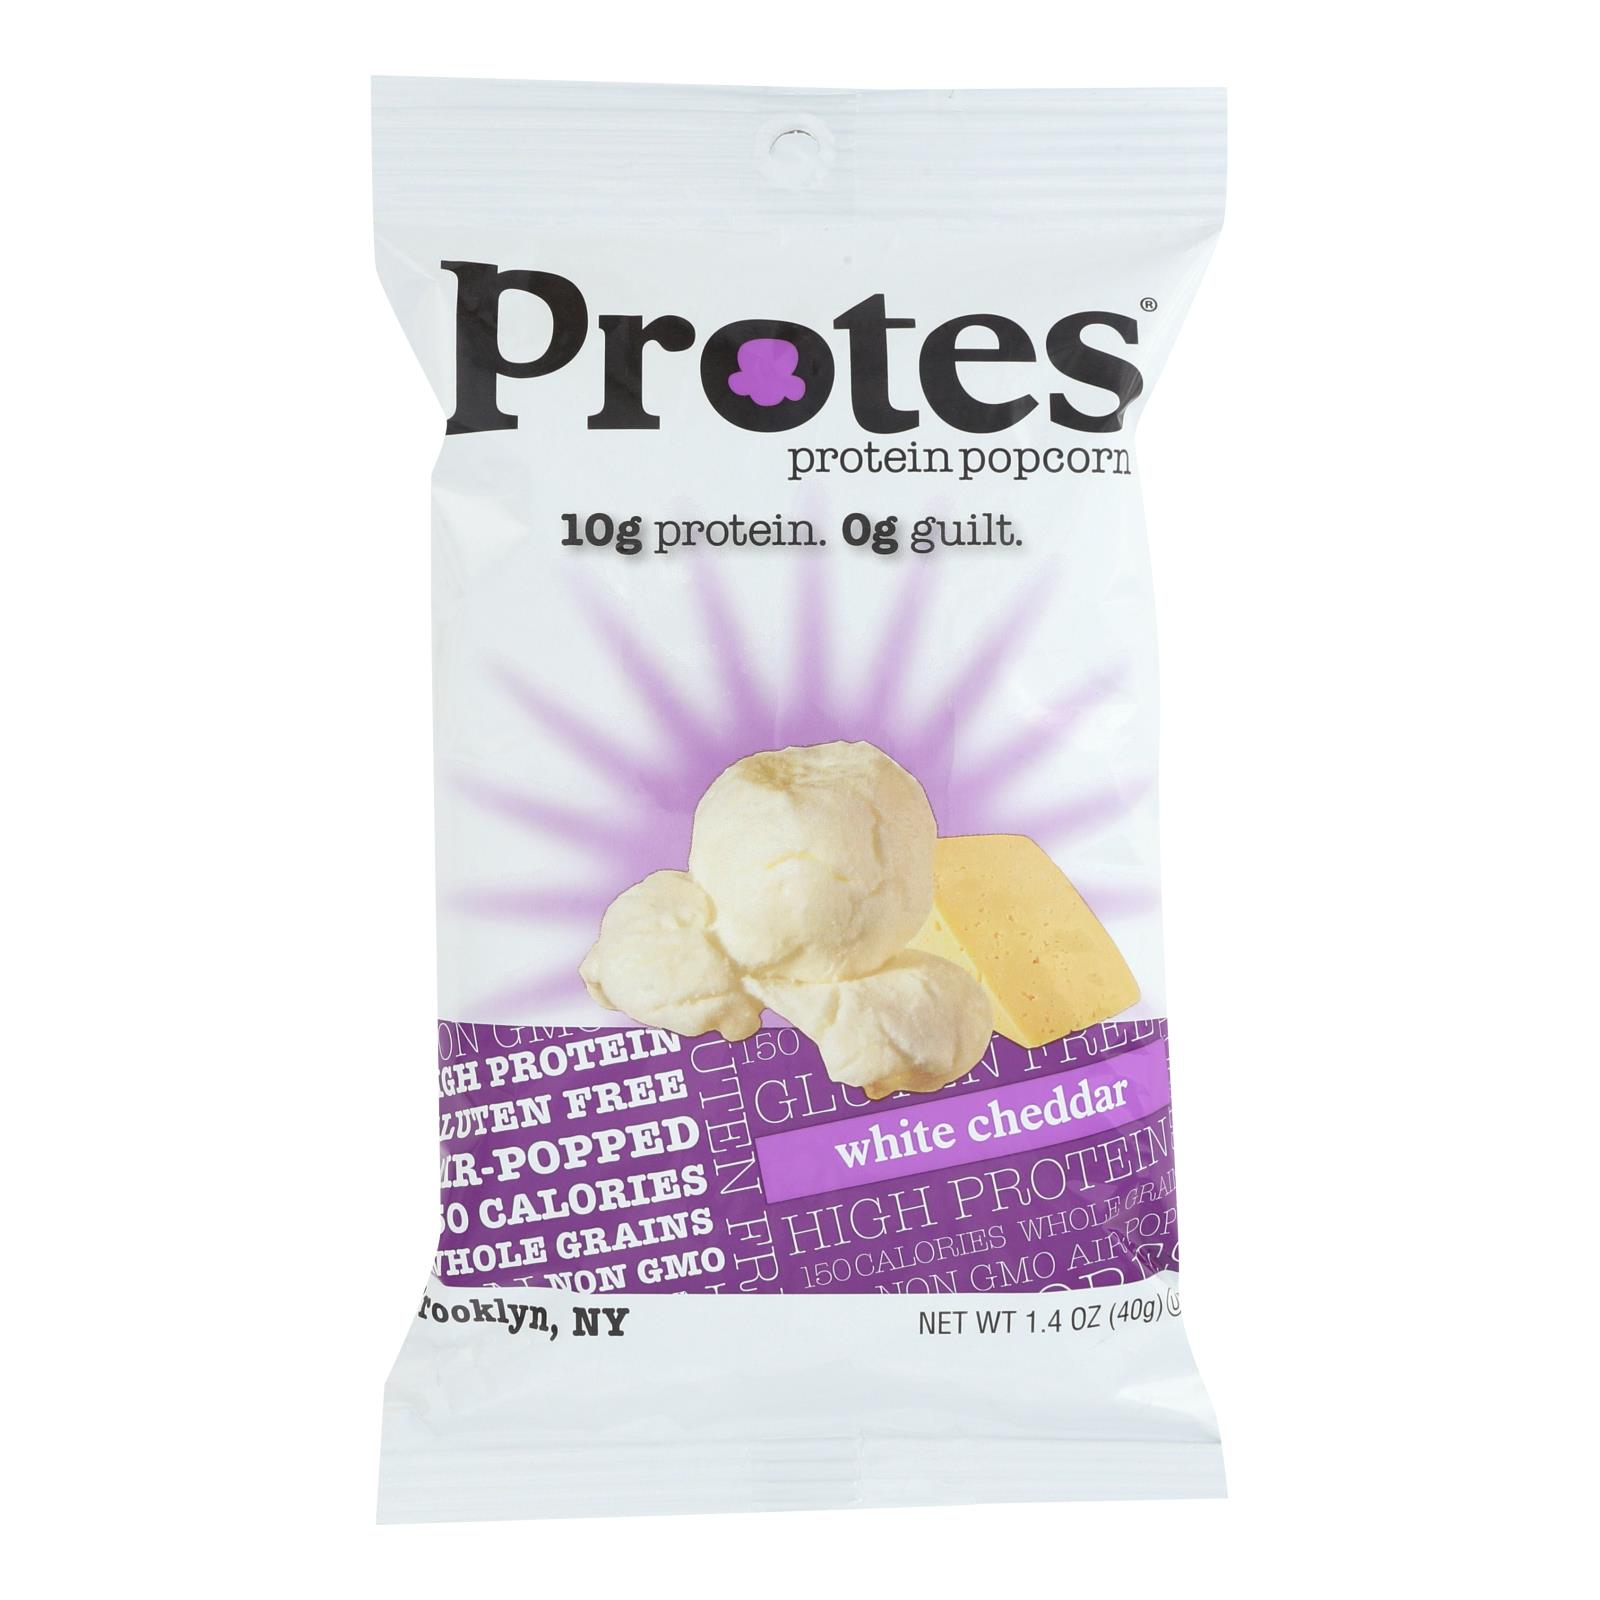 Protes Protein Chips Protein Popcorn - Case of 24 - 1.4 OZ